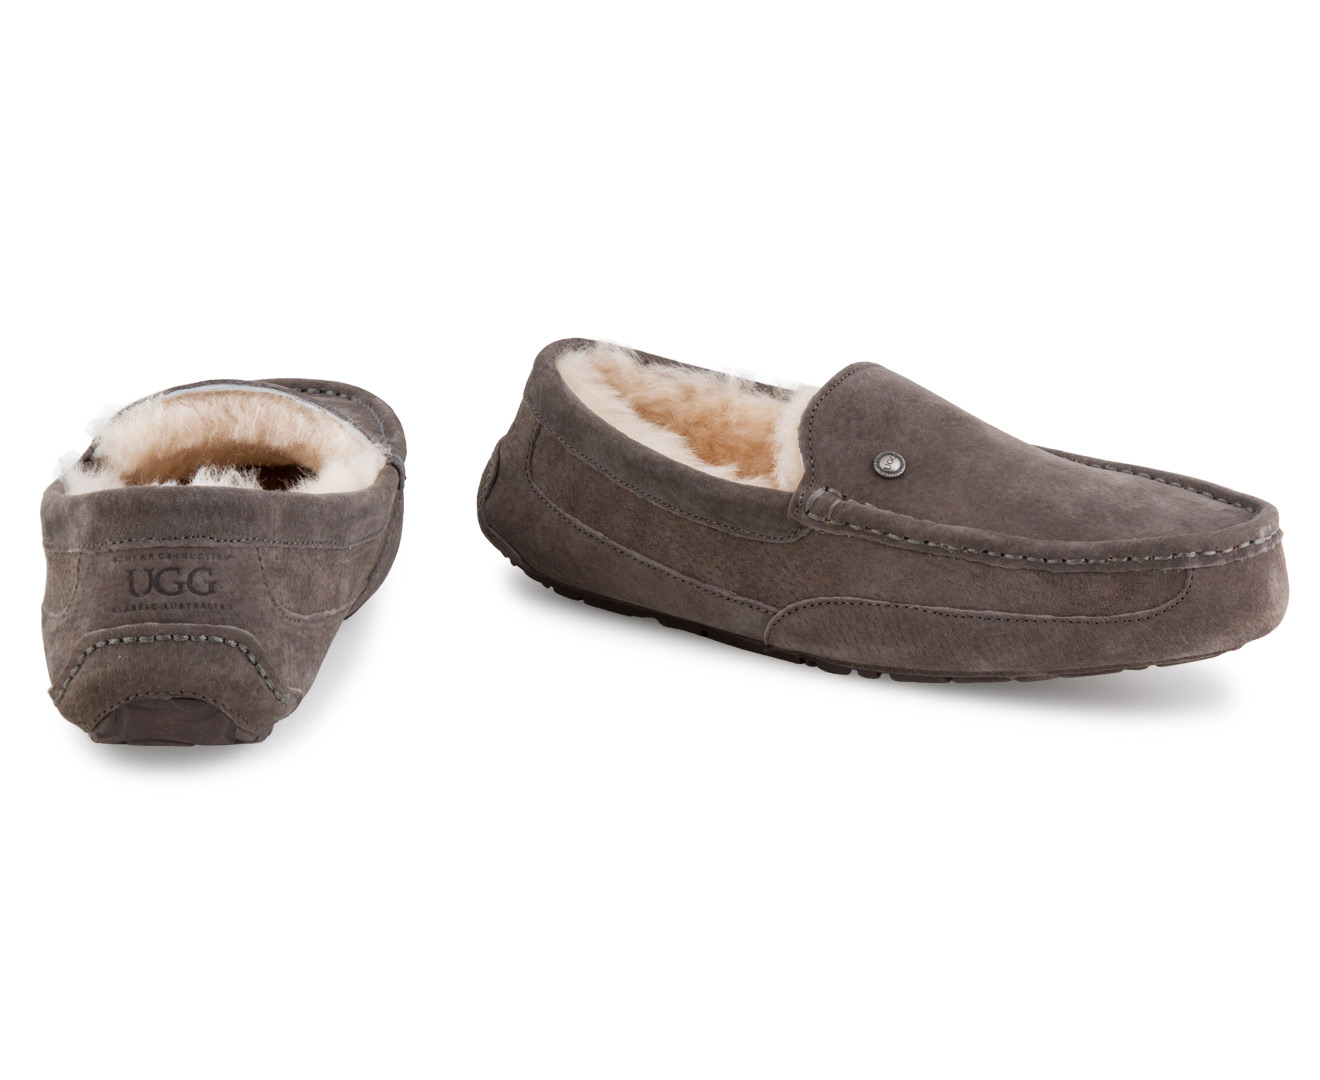 OZWEAR Connection Ugg Men's Moccasin - Charcoal